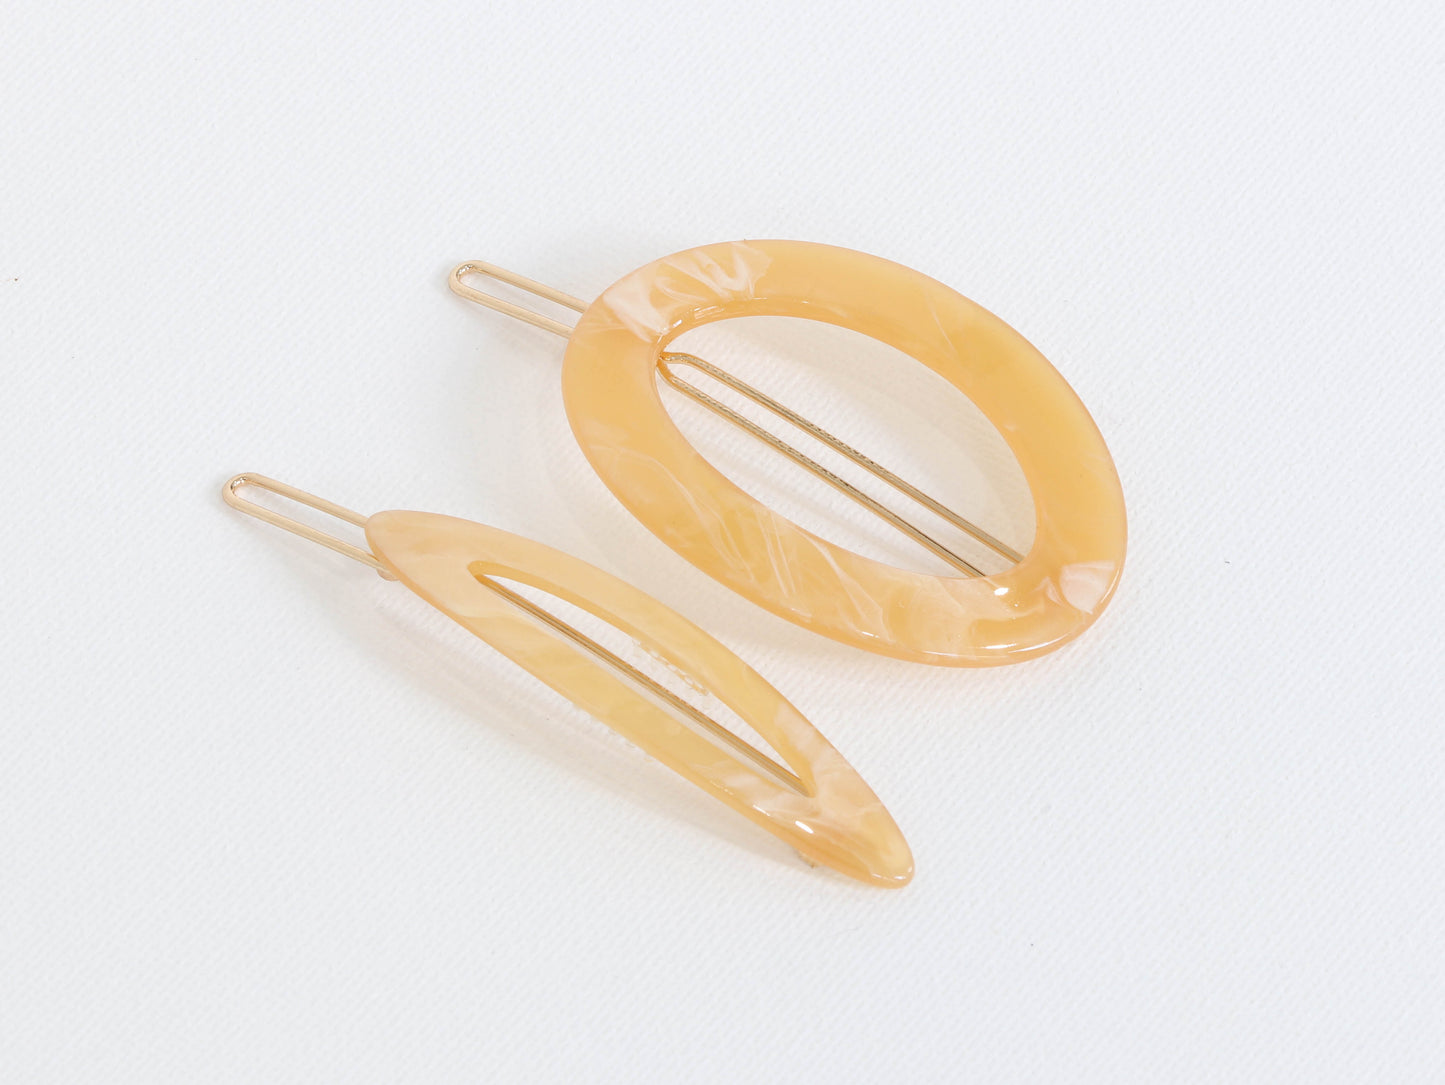 Recycled Resin Hairclips Clarissa Set of 2